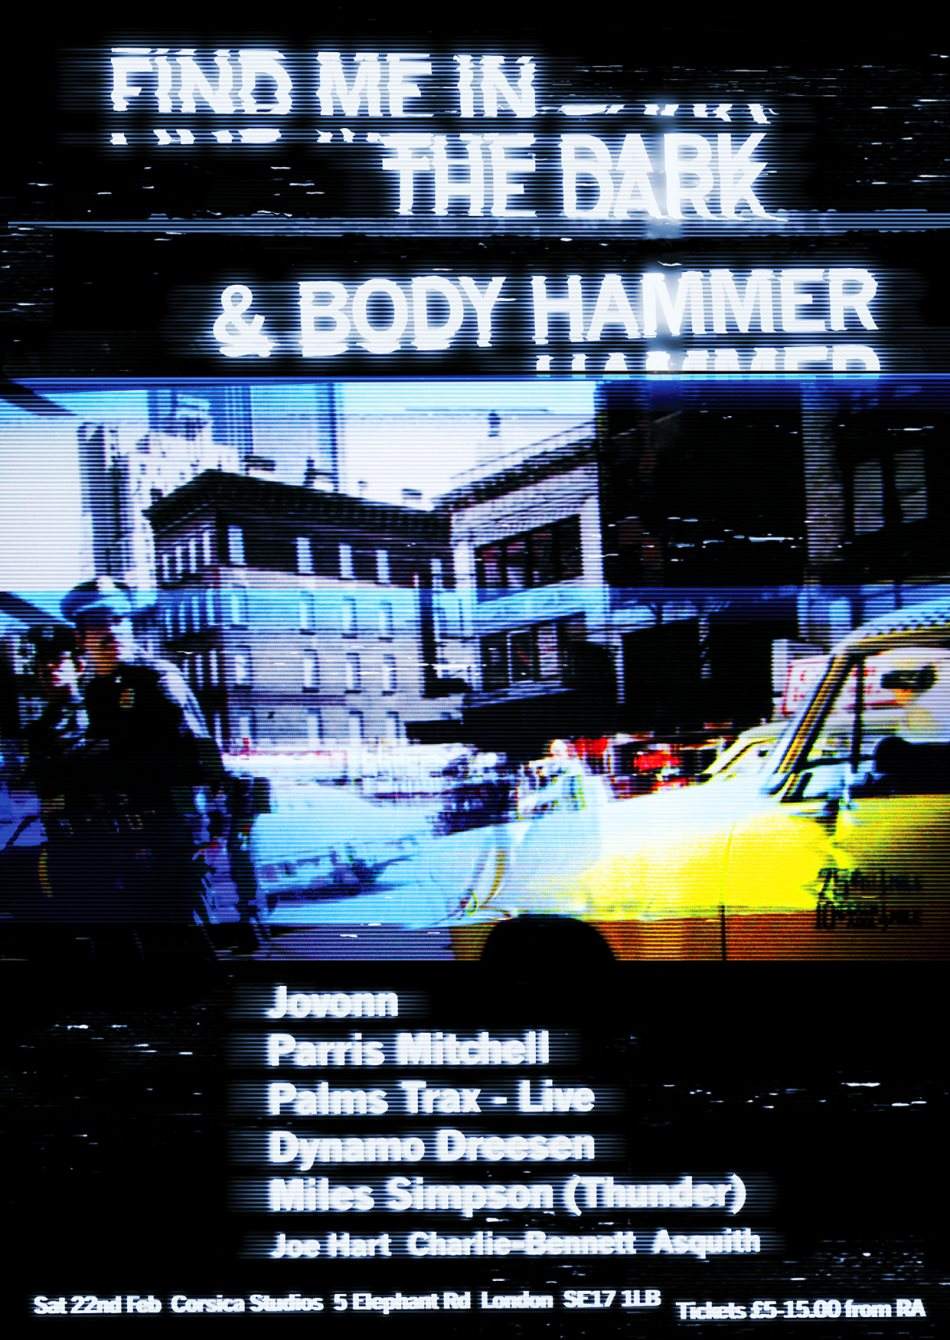 Find Me In The Dark x Body Hammer with Jovonn, Parris Mitchell, Palms Trax and Dynamo Dreesen - Página frontal